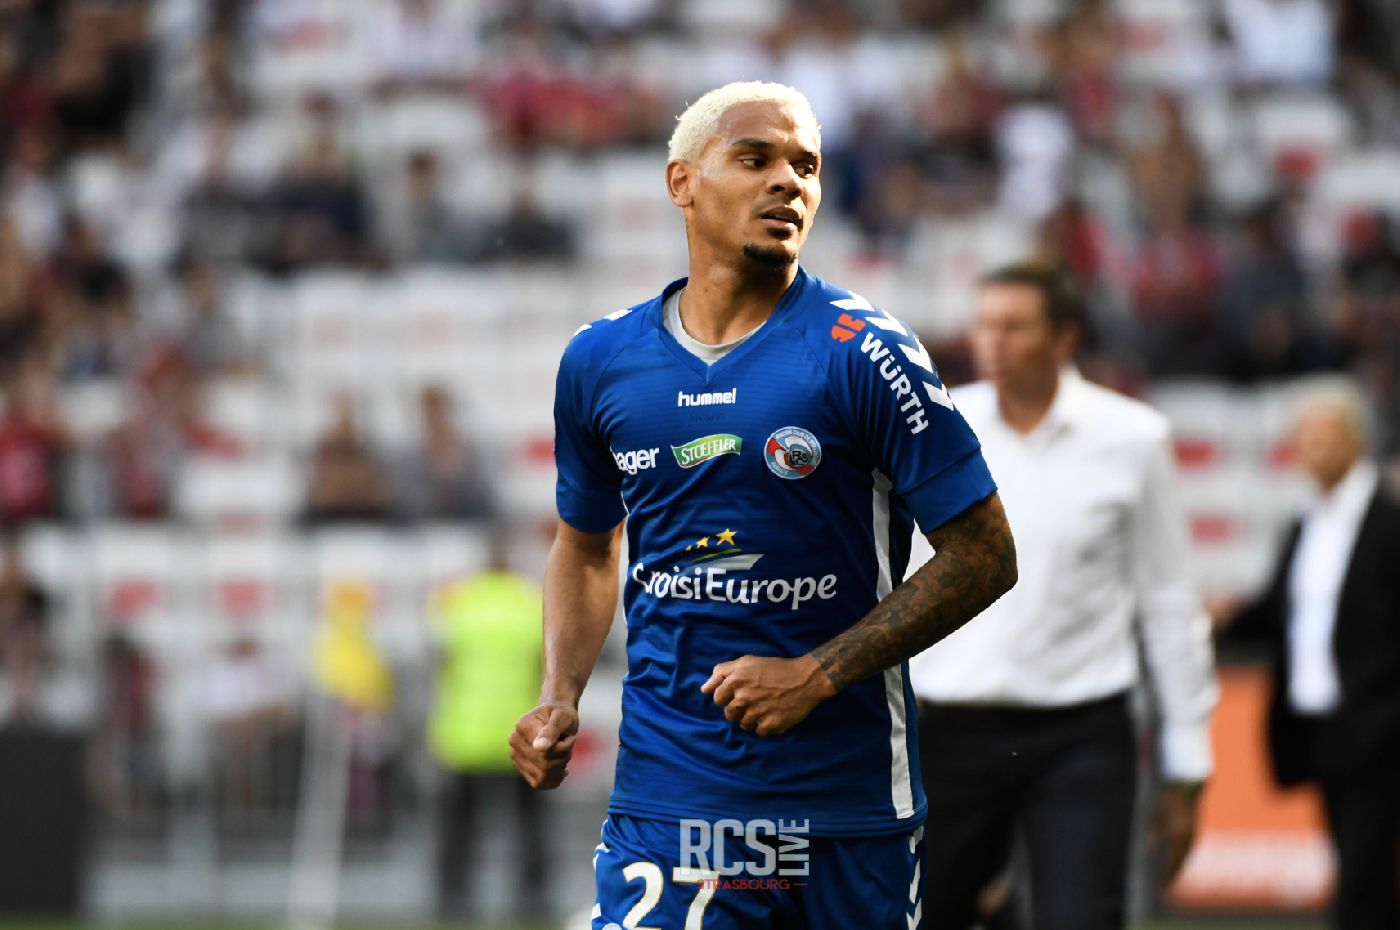 Strasbourg's Kenny Lala had an excellent 2018/19 season in Ligue 1. (Getty Images)